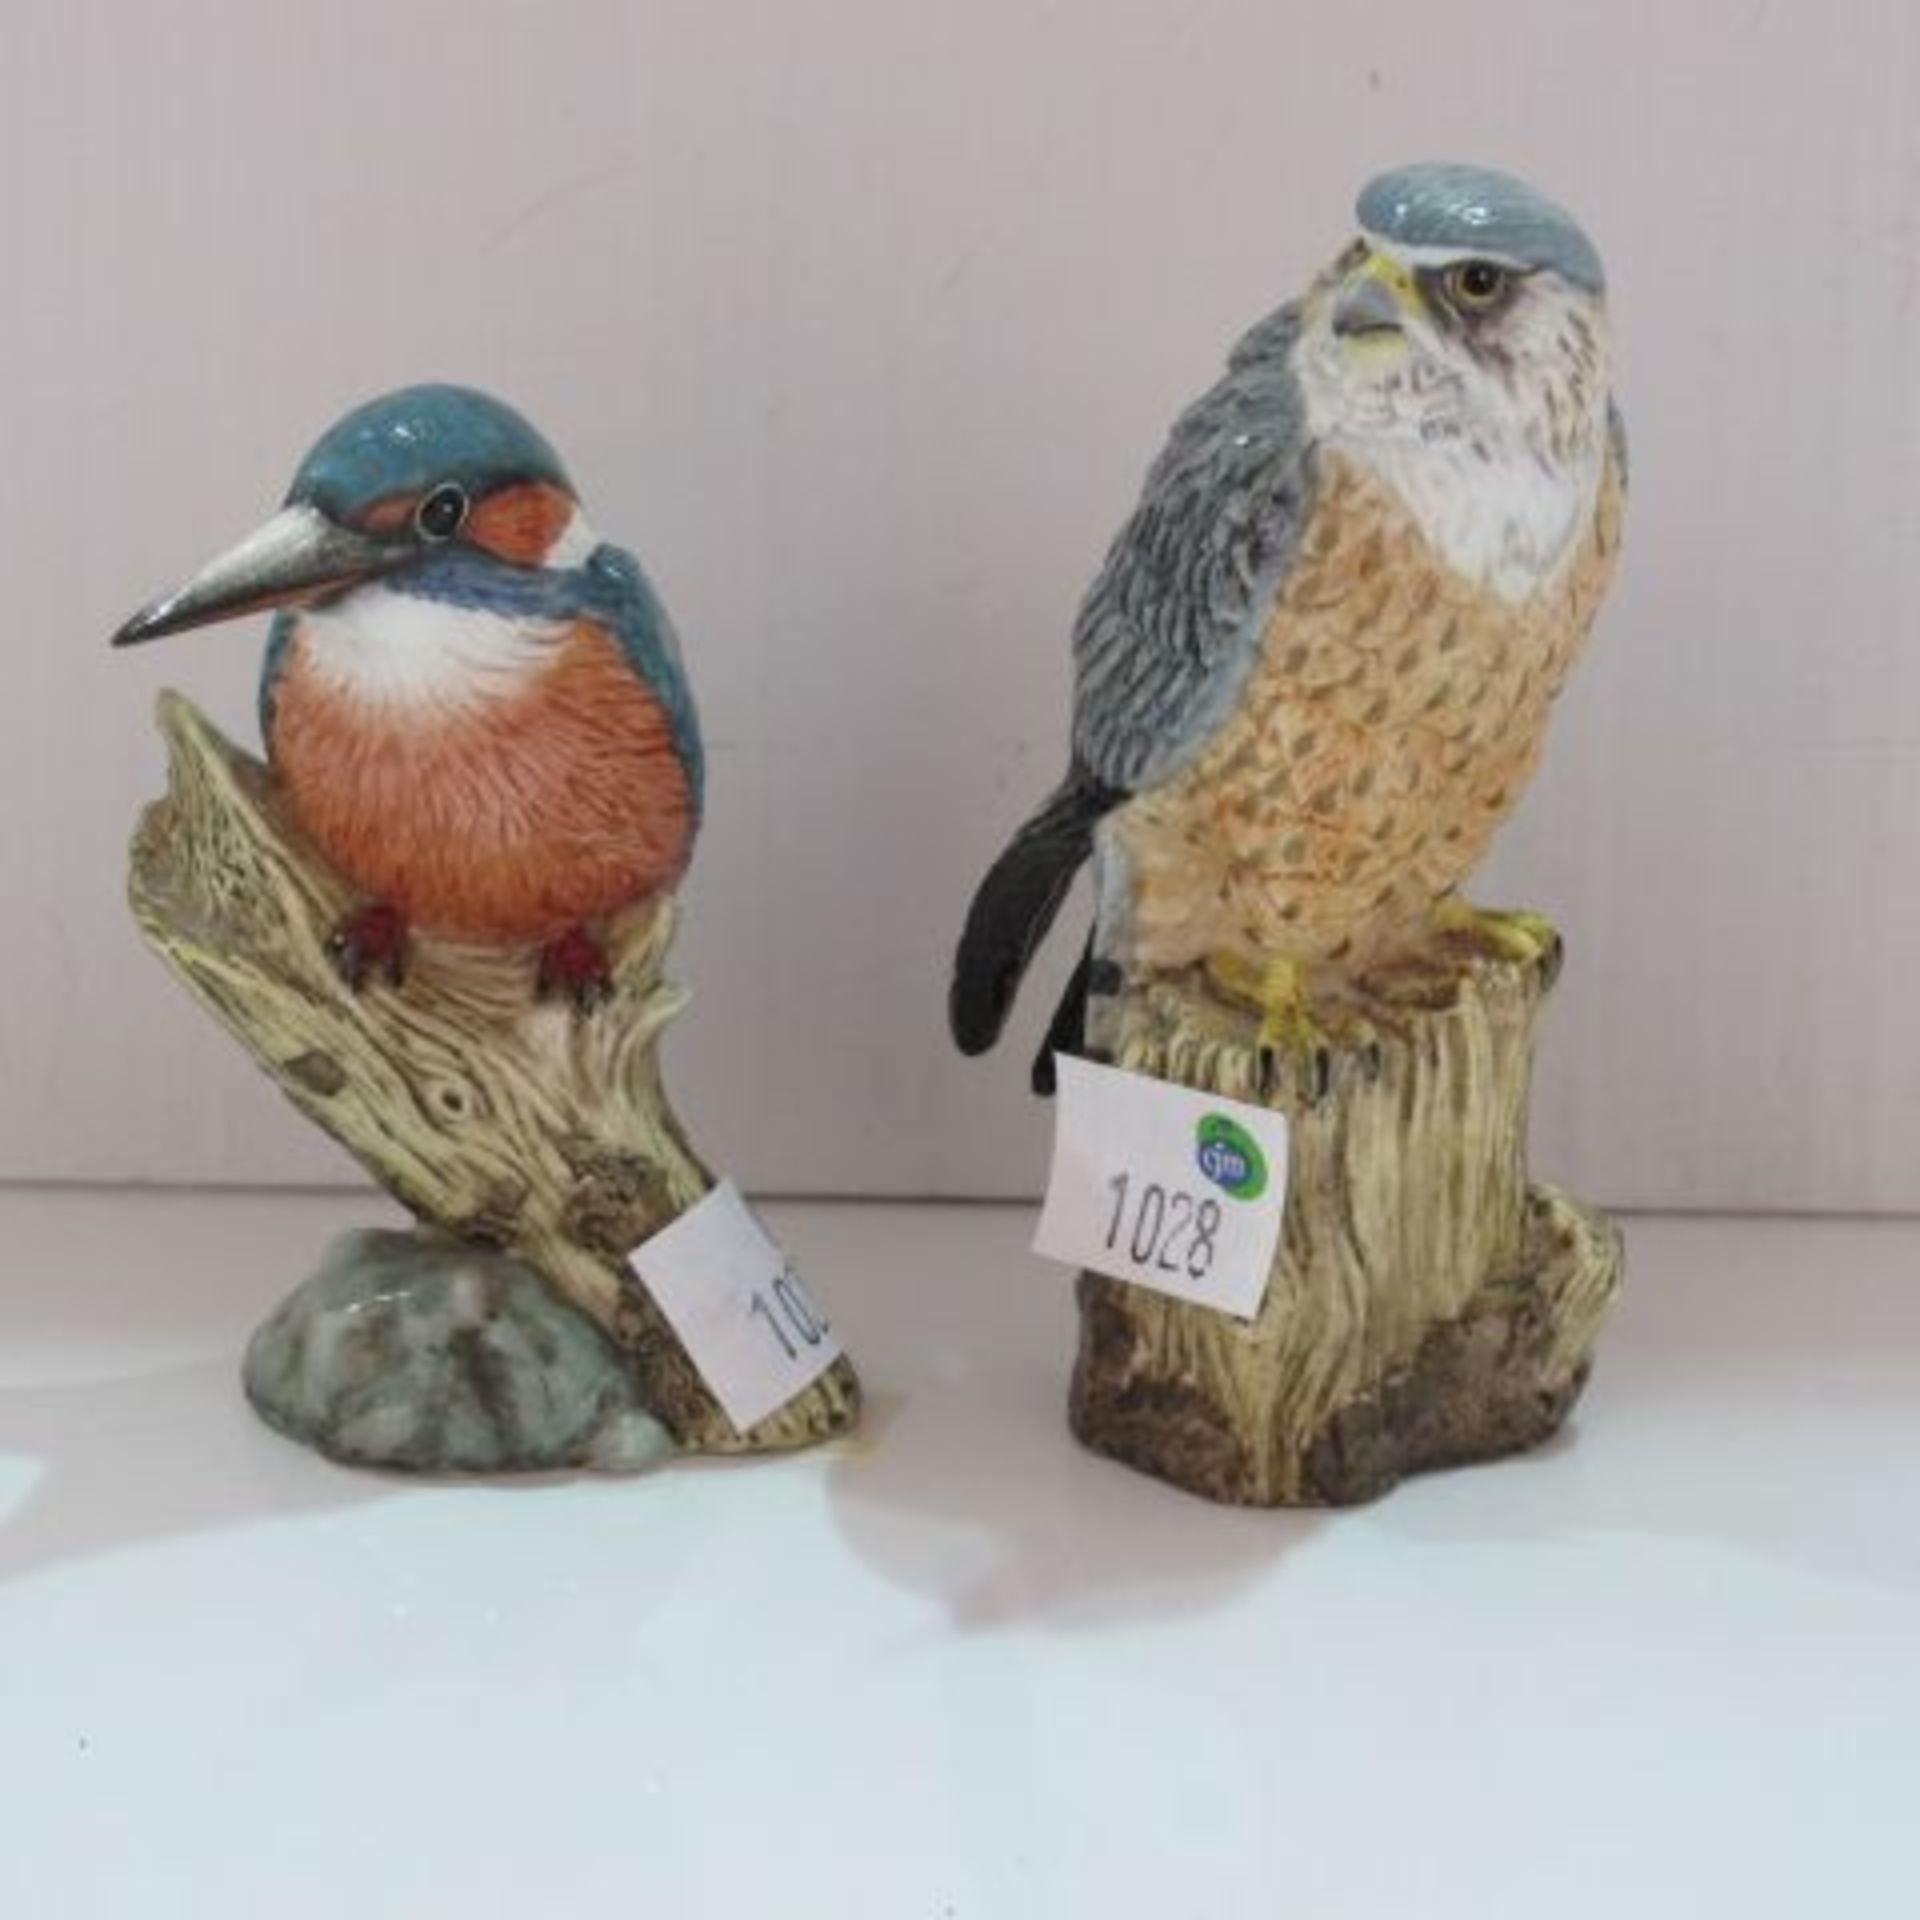 Two Hand Painted Mack Fine Bone China Figures - A Merlin and Kingfisher - Signed. J. Mack (est. £